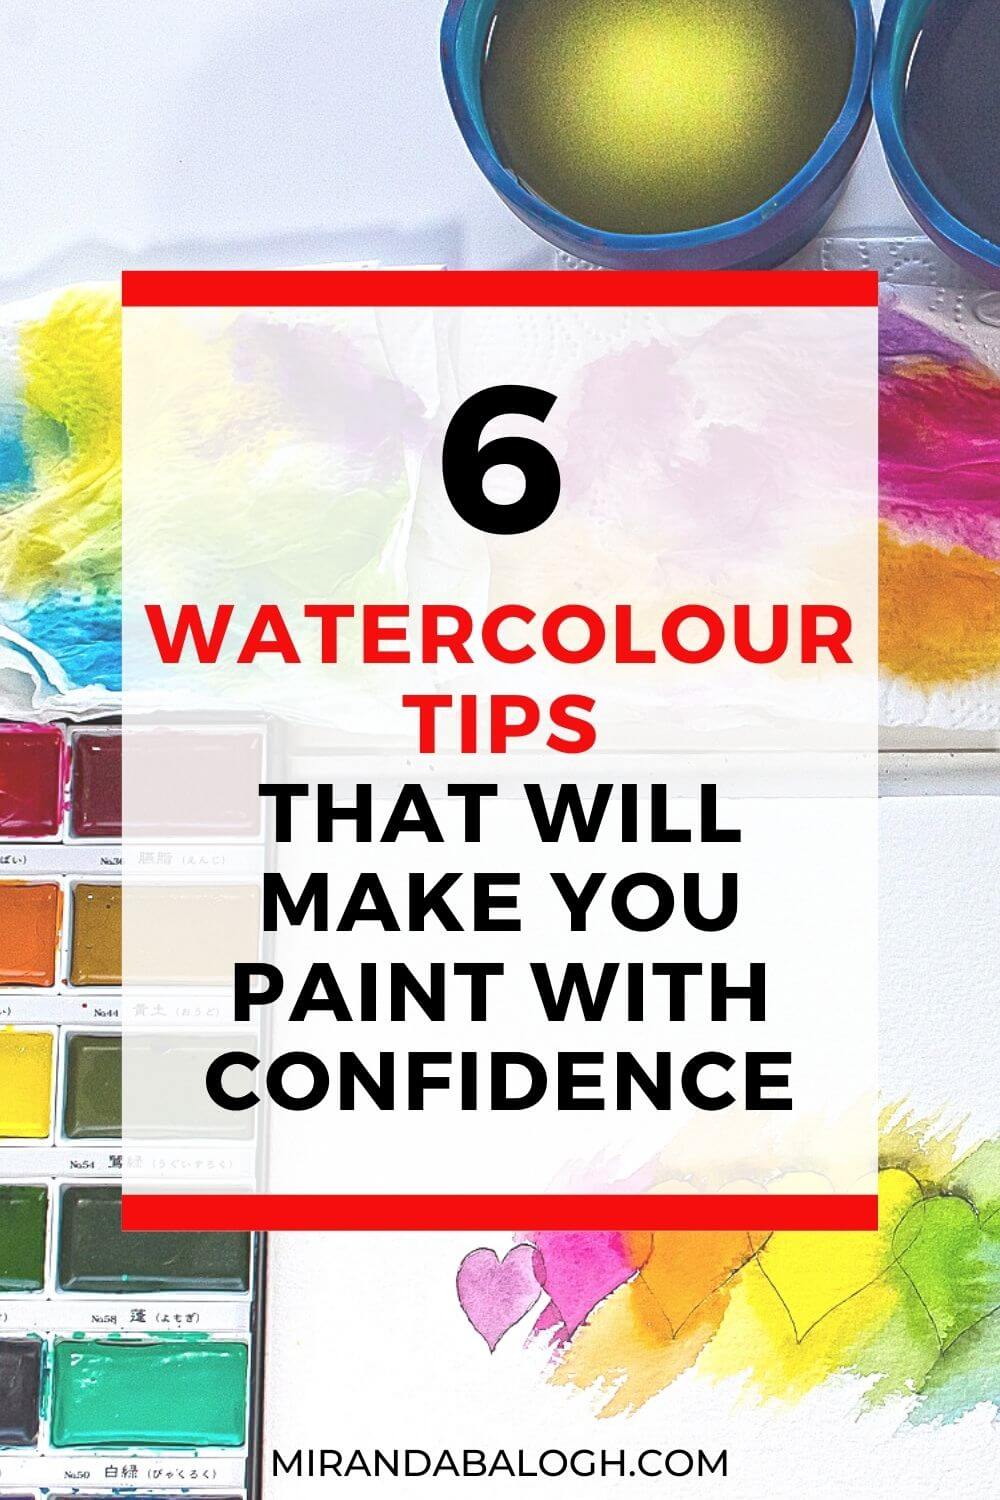 Want to learn how to improve your watercolour skills? Then click here to get 6 expert watercolour tips for beginners and novices. These watercolours tips and tricks will help you understand the importance practicing watercolour brush techniques, why studying colour theory is necessary, and which art supplies are the best to invest in. By following these watercolour dos and don’ts, you’ll become a more confident painter in no time!